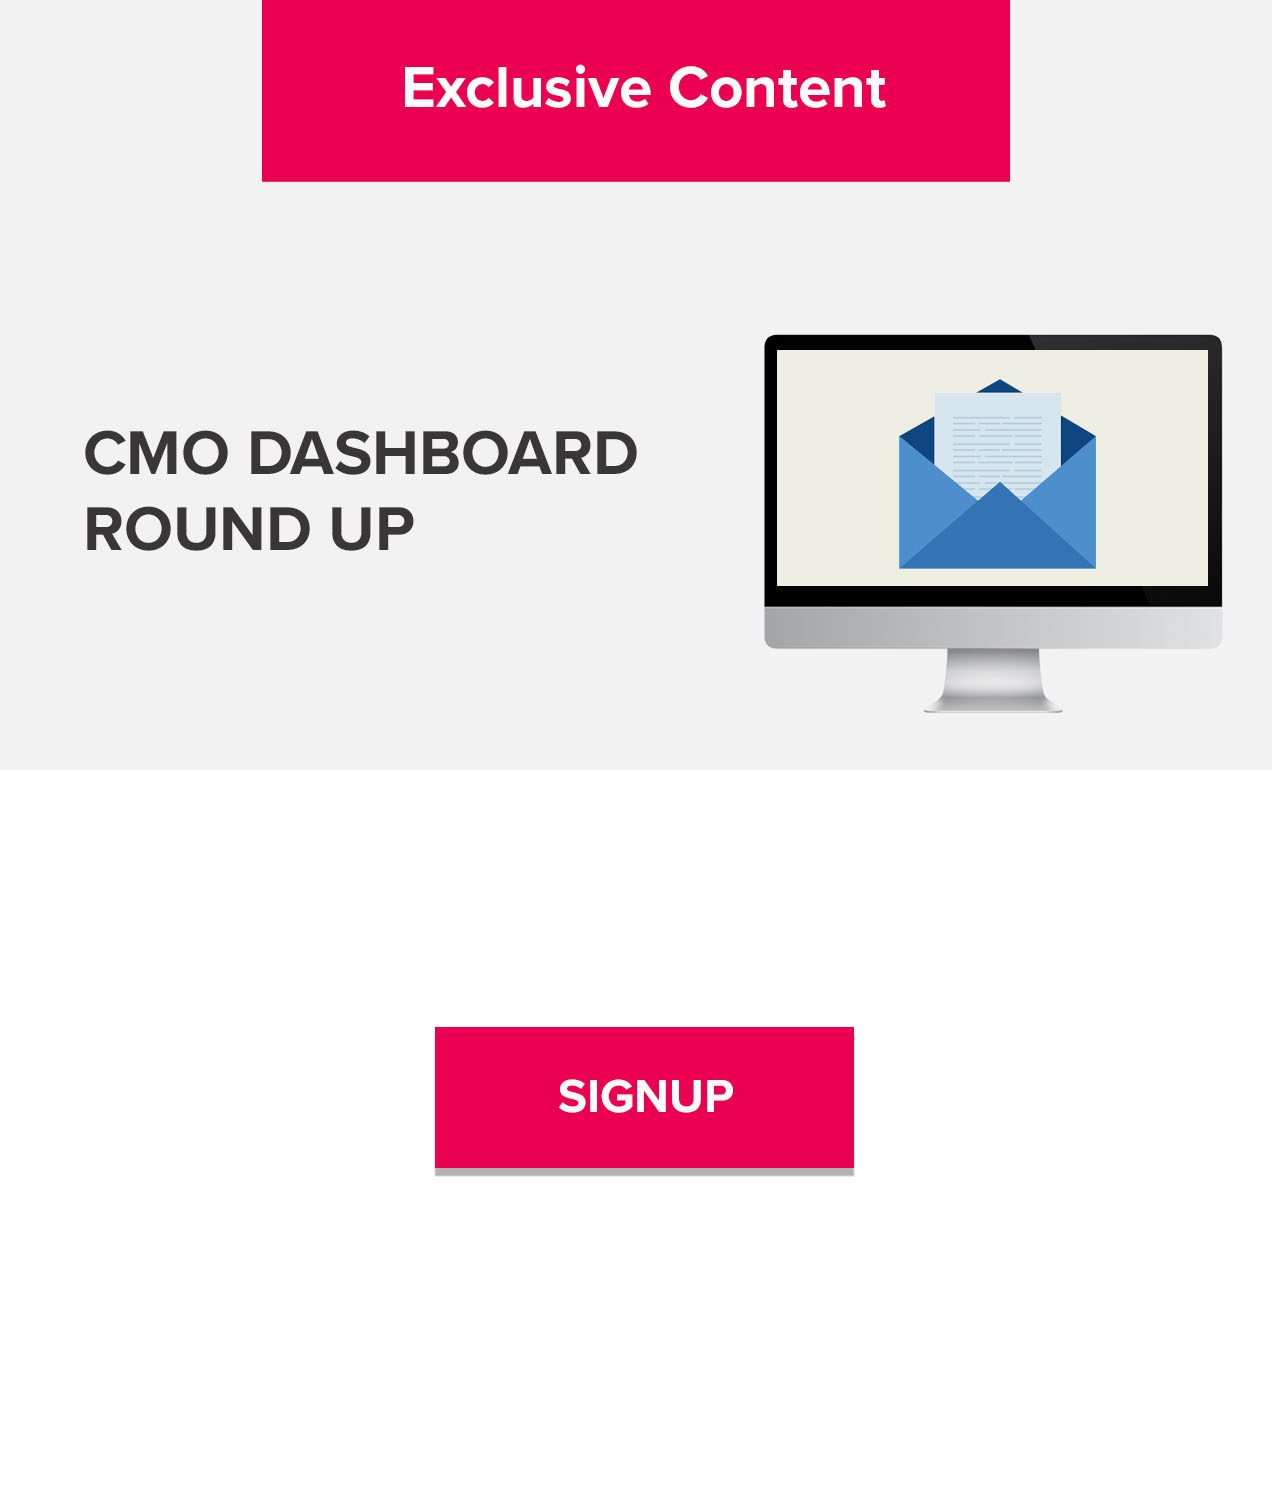 Get reminders on how to become a CMO